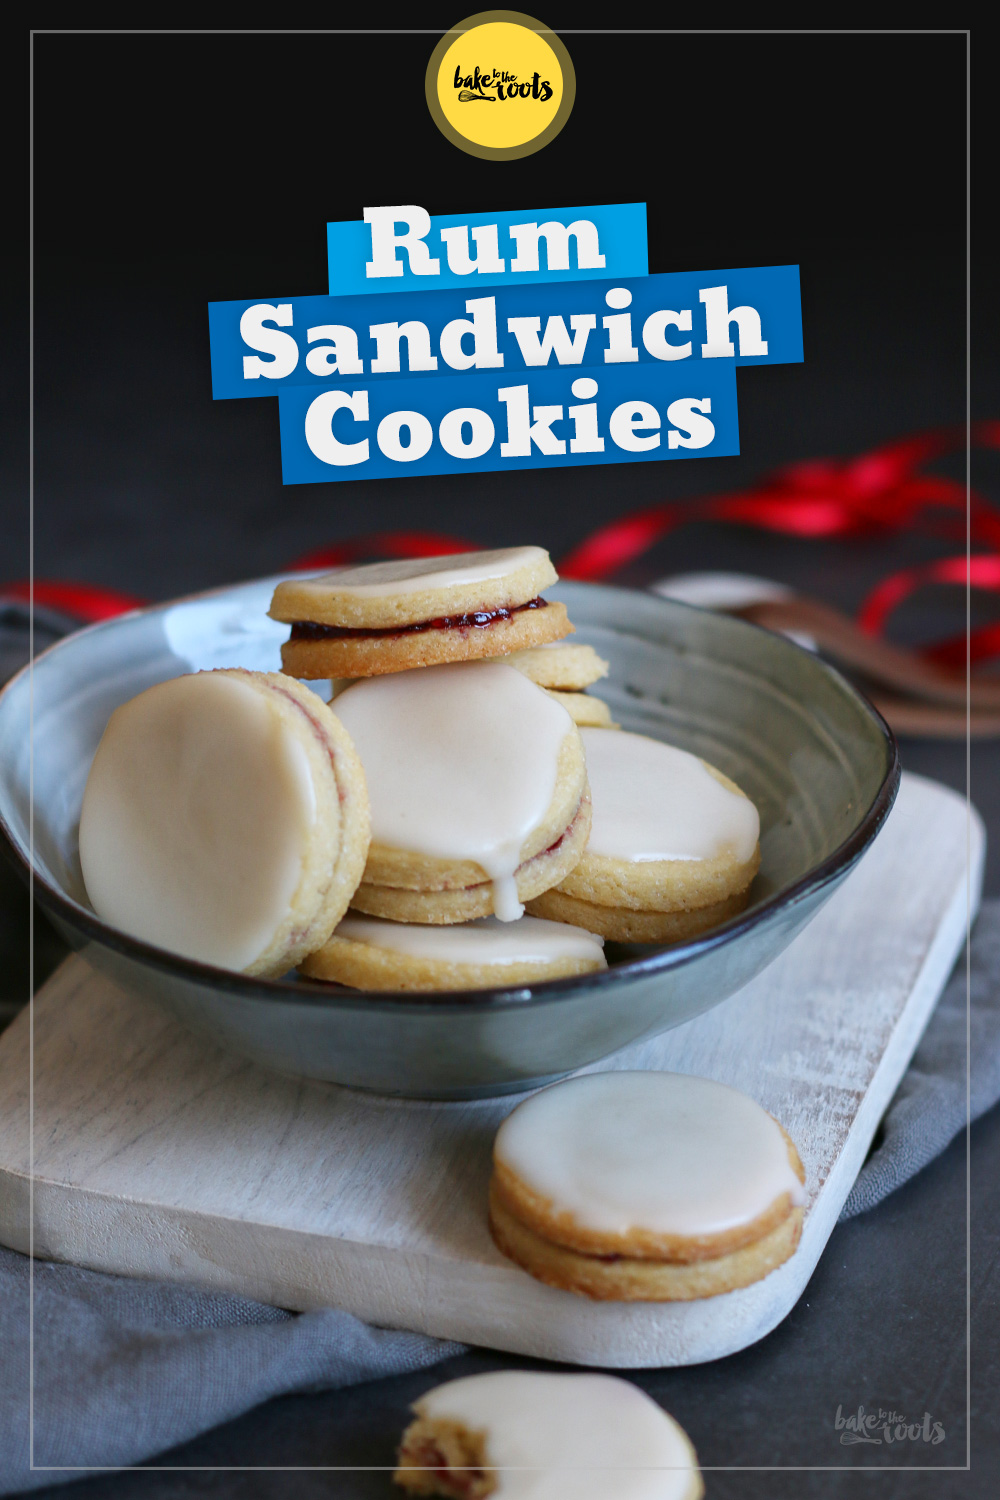 Rum Sandwich Cookies | Bake to the roots